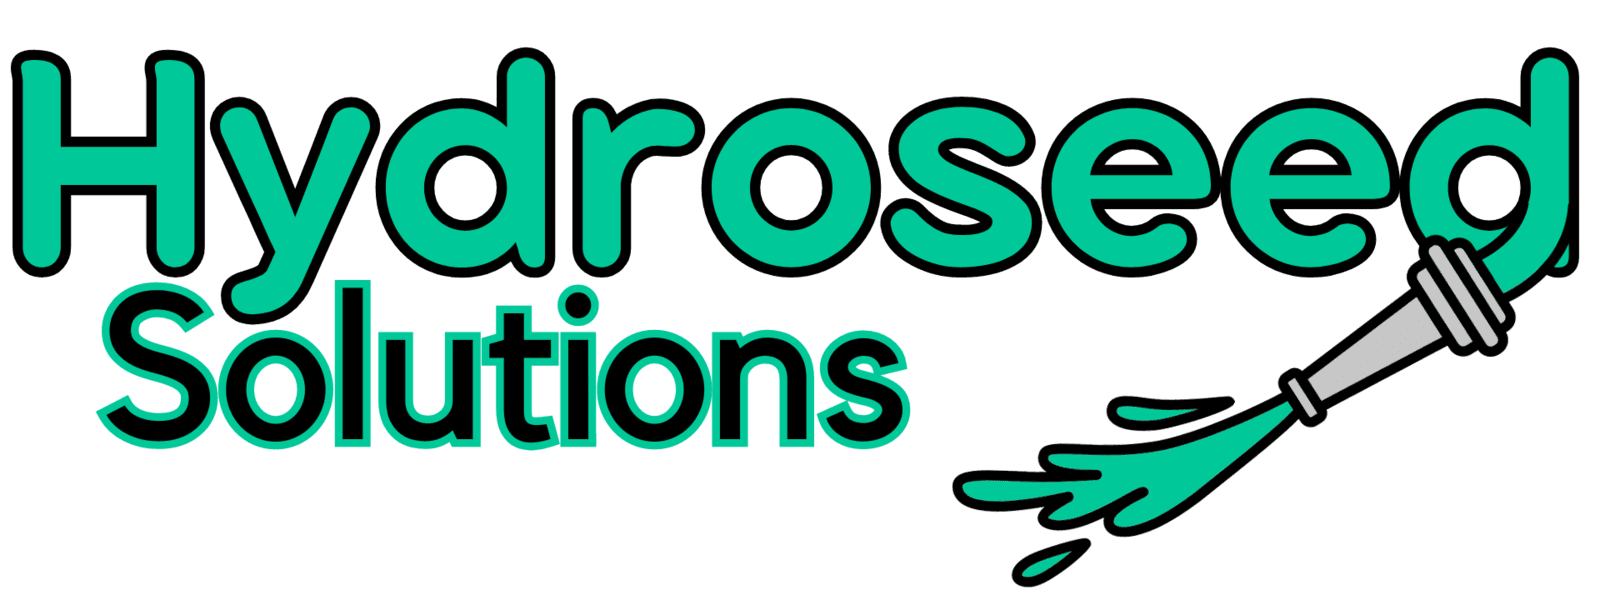 Hydroseed Solutions